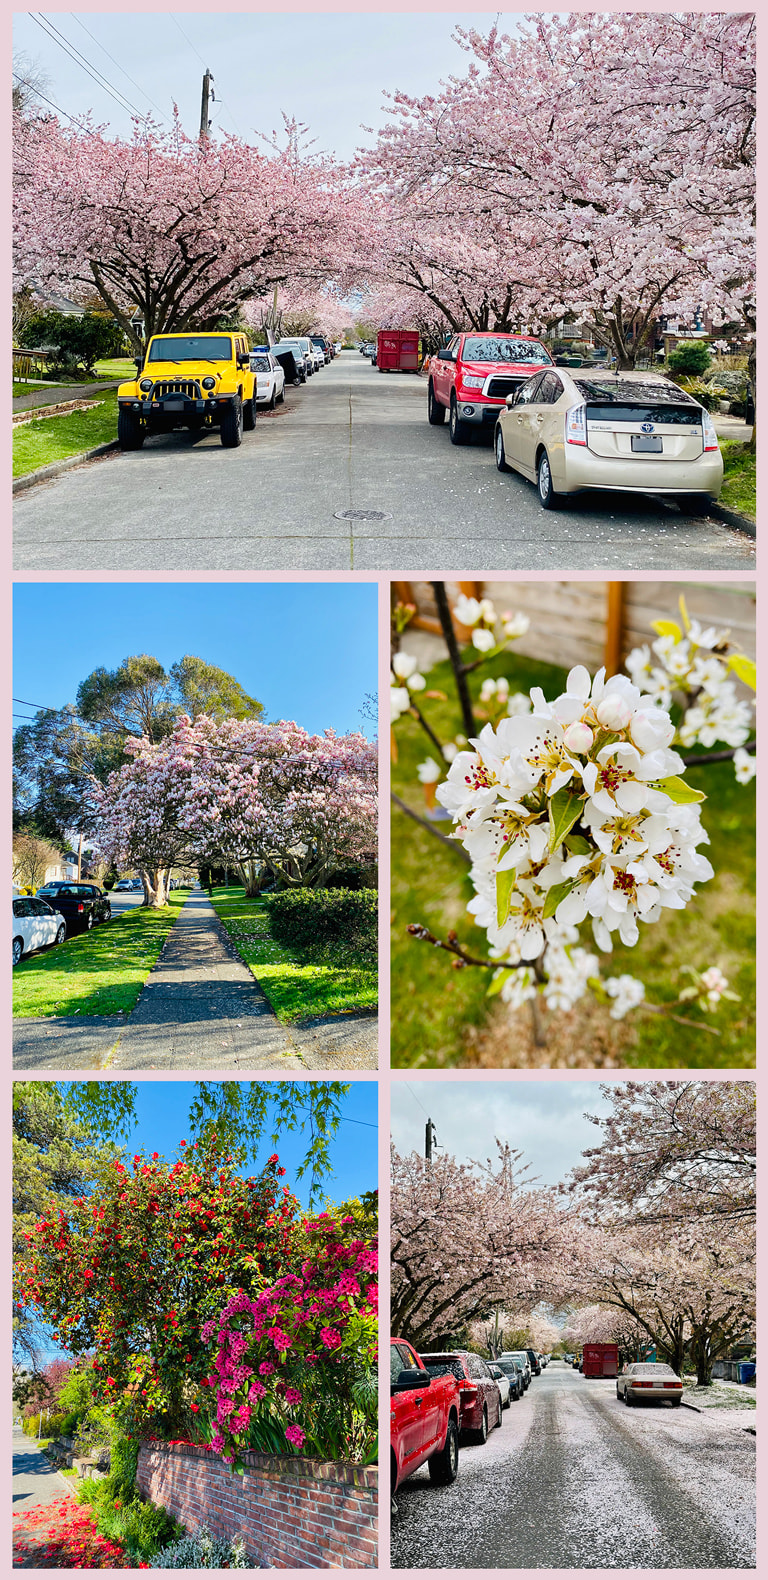 A grid of floral-rich photos: A street completely lined with cherry trees bursting with pale pink sakura blossoms. A big bushy magnolia tree. A cluster of white blossoms on our pear tree. A massive rose bush with red roses, next to some fuschia azaleas. The same cherry blossom street now coated in petals like a layer of snow.